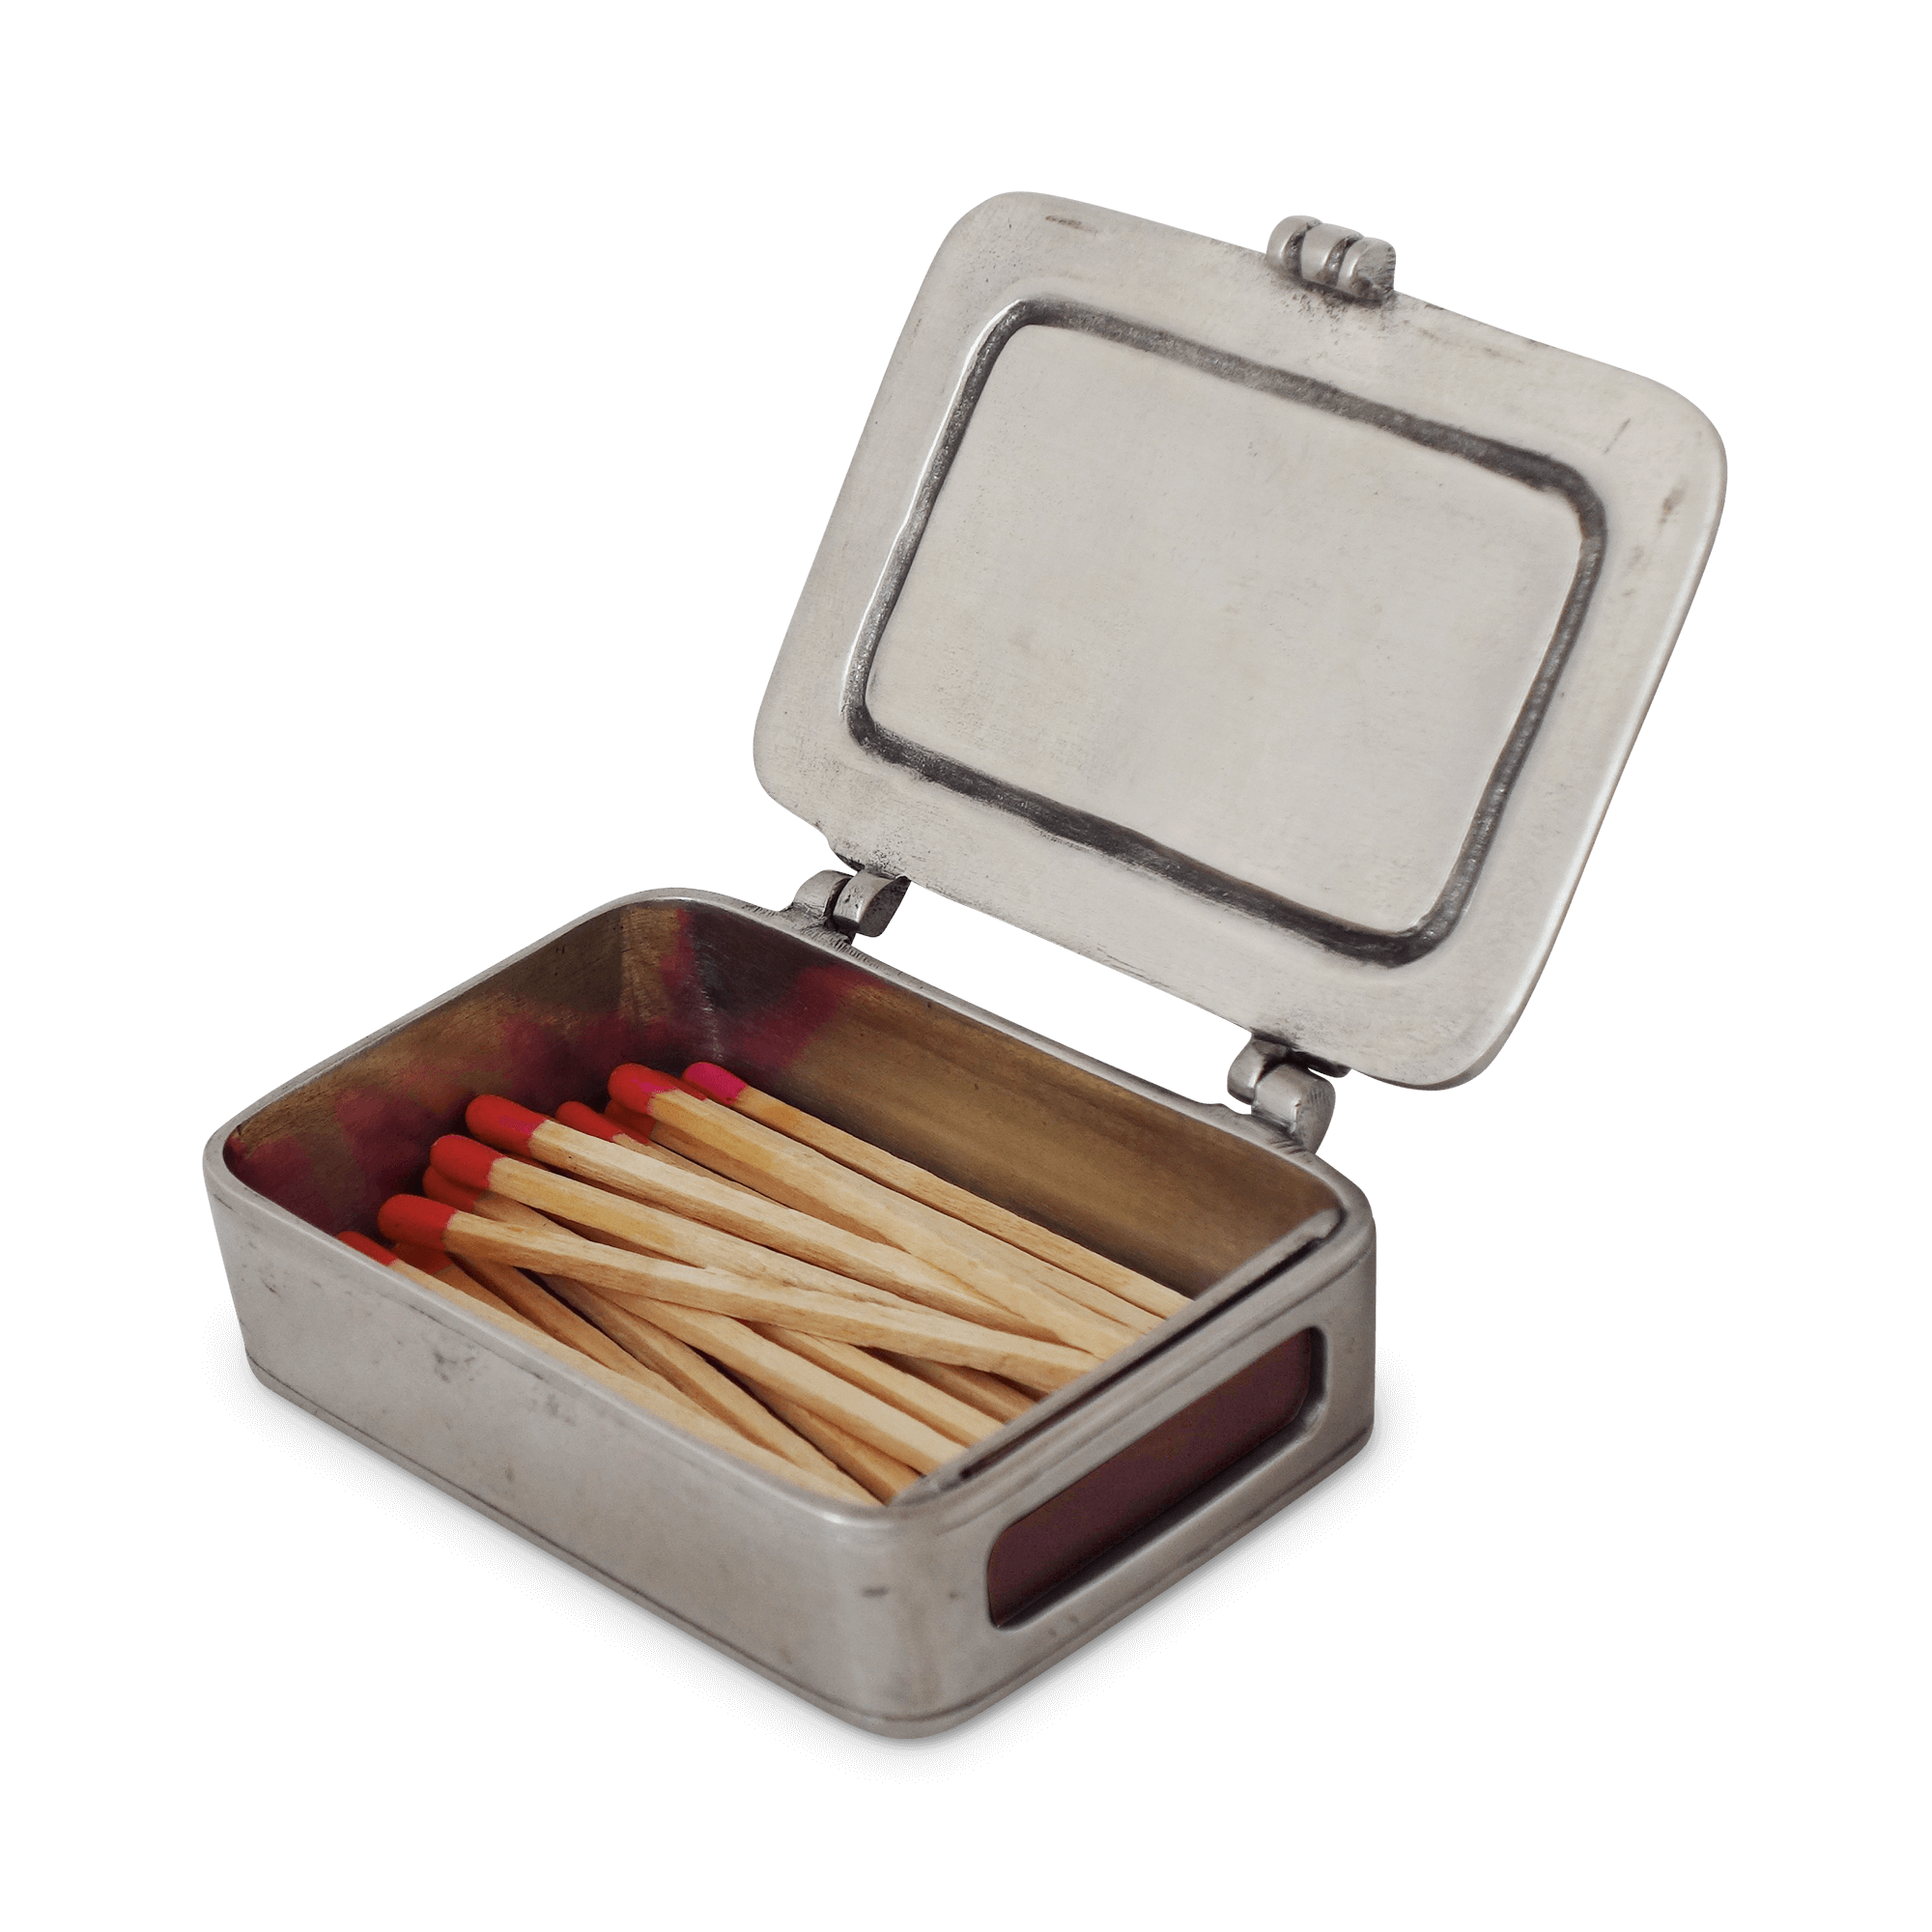 Match Box with Striker and Matches